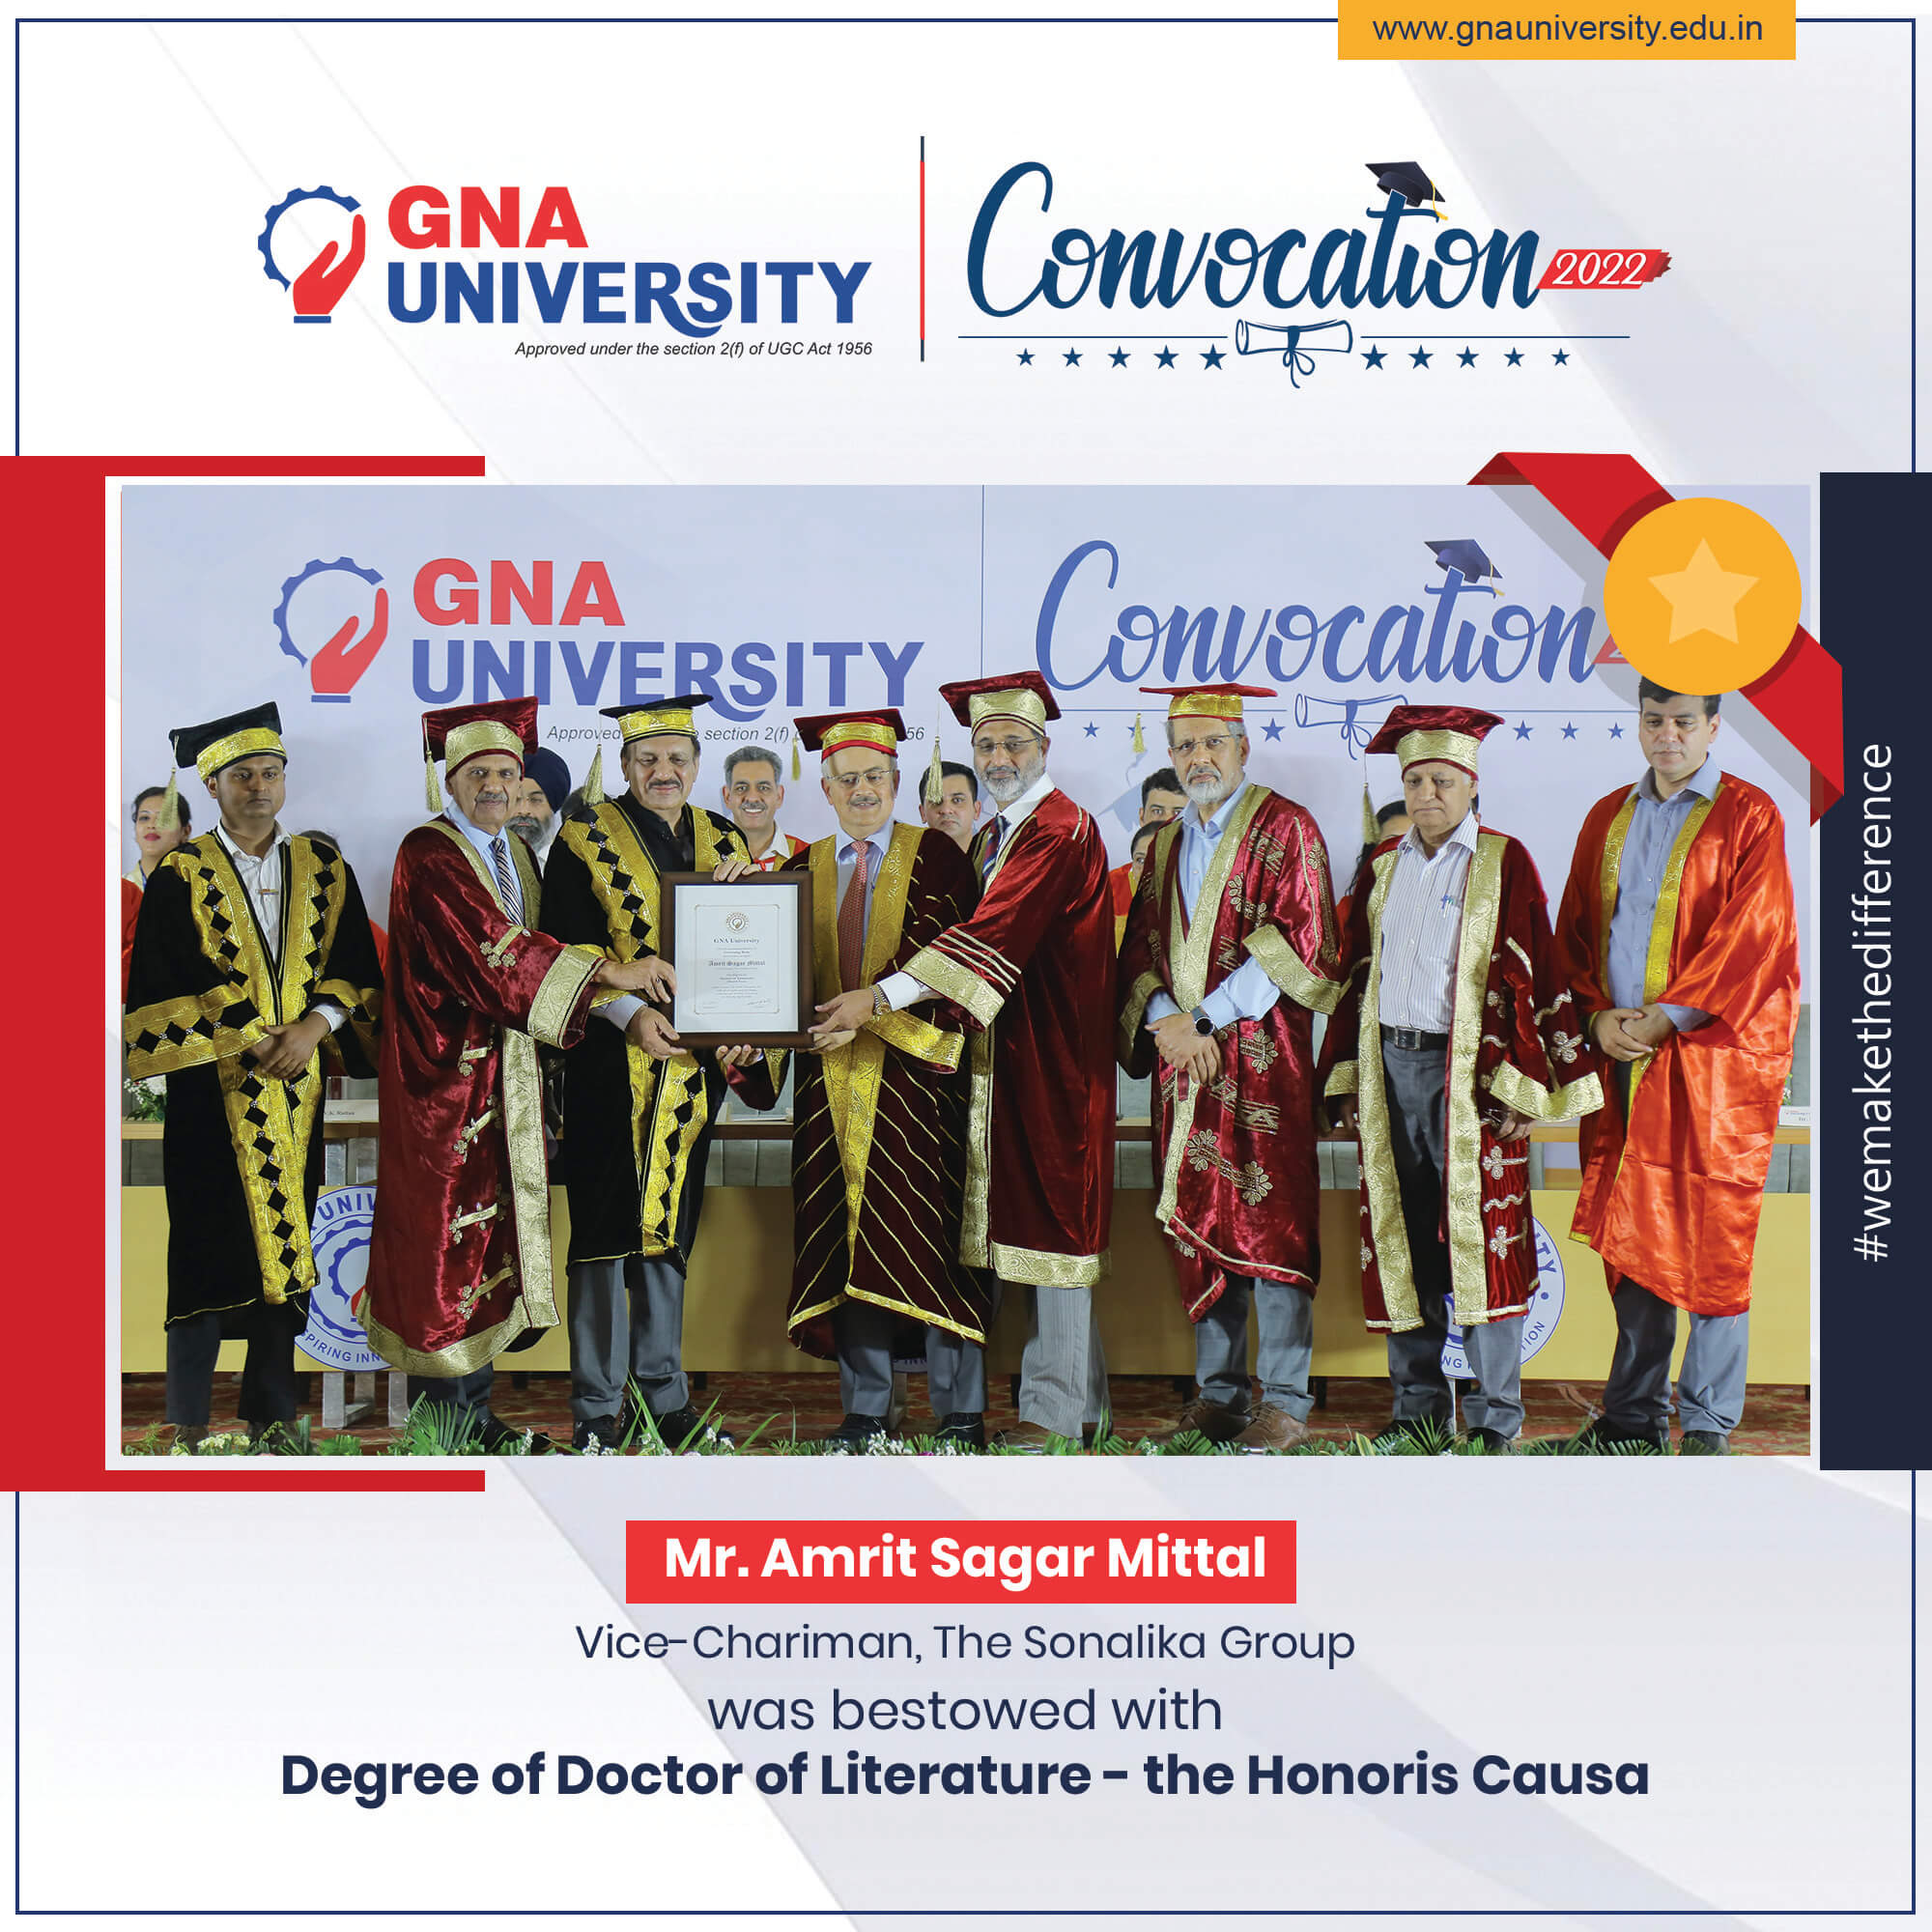 GNA UNIVERSITY CONFERS MR. A.S. MITTAL WITH THE DEGREE OF DOCTOR OF LITERATURE (HONORIS CAUSA)